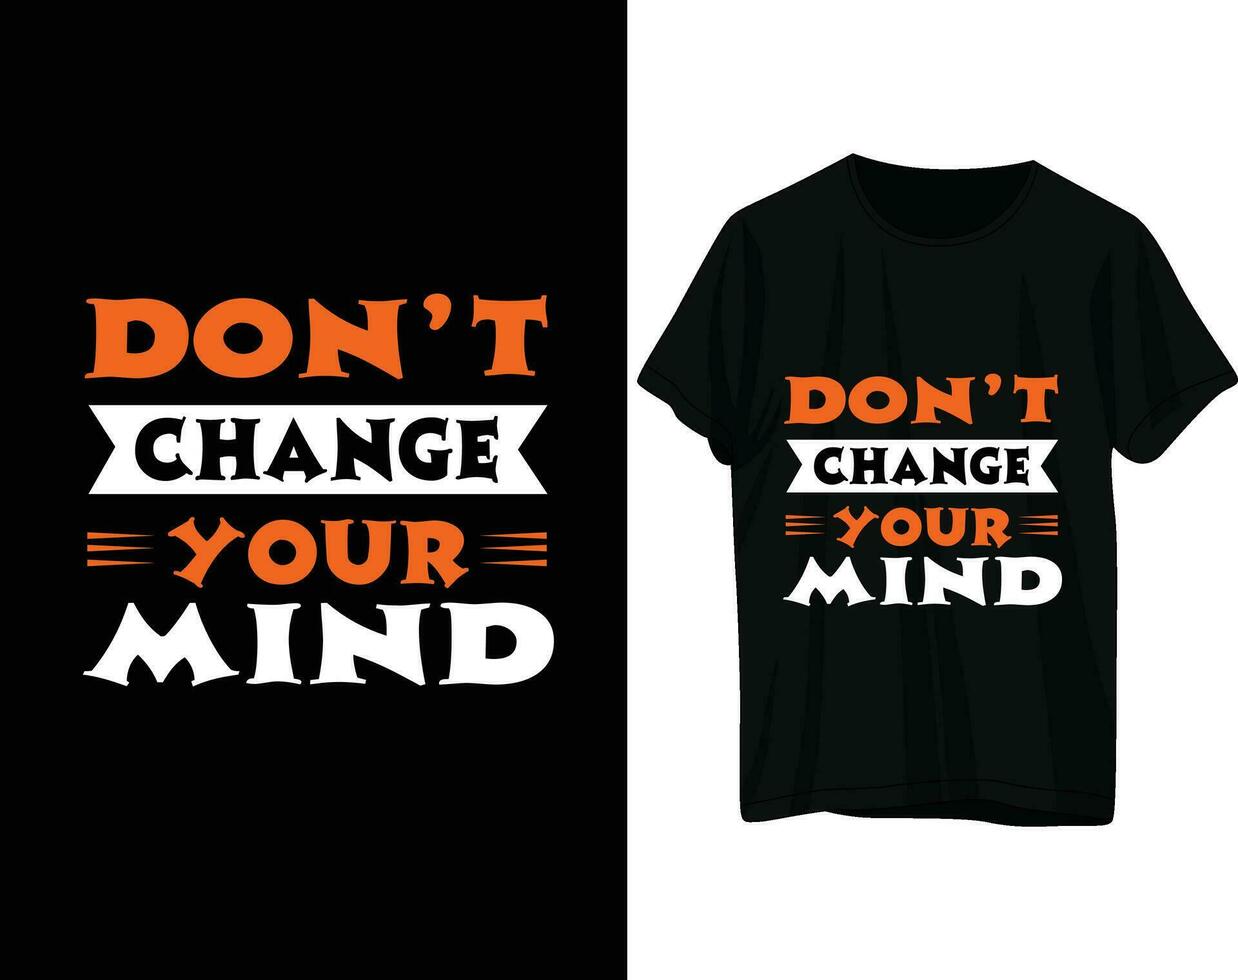 Don't change your mind typography tshirt design vector